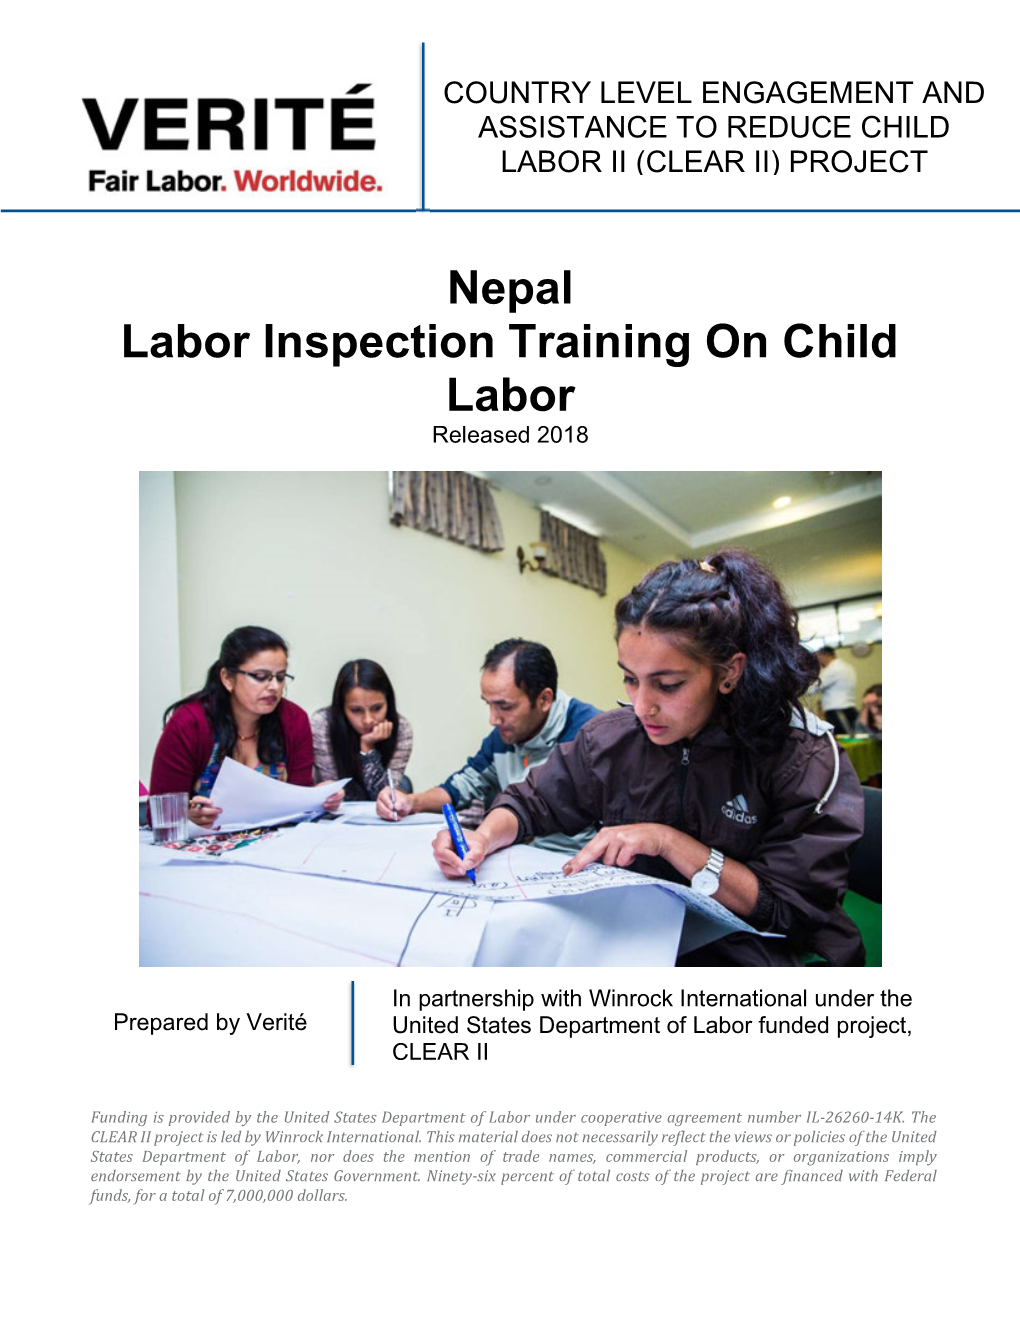 Nepal Labor Inspection Training on Child Labor Released 2018